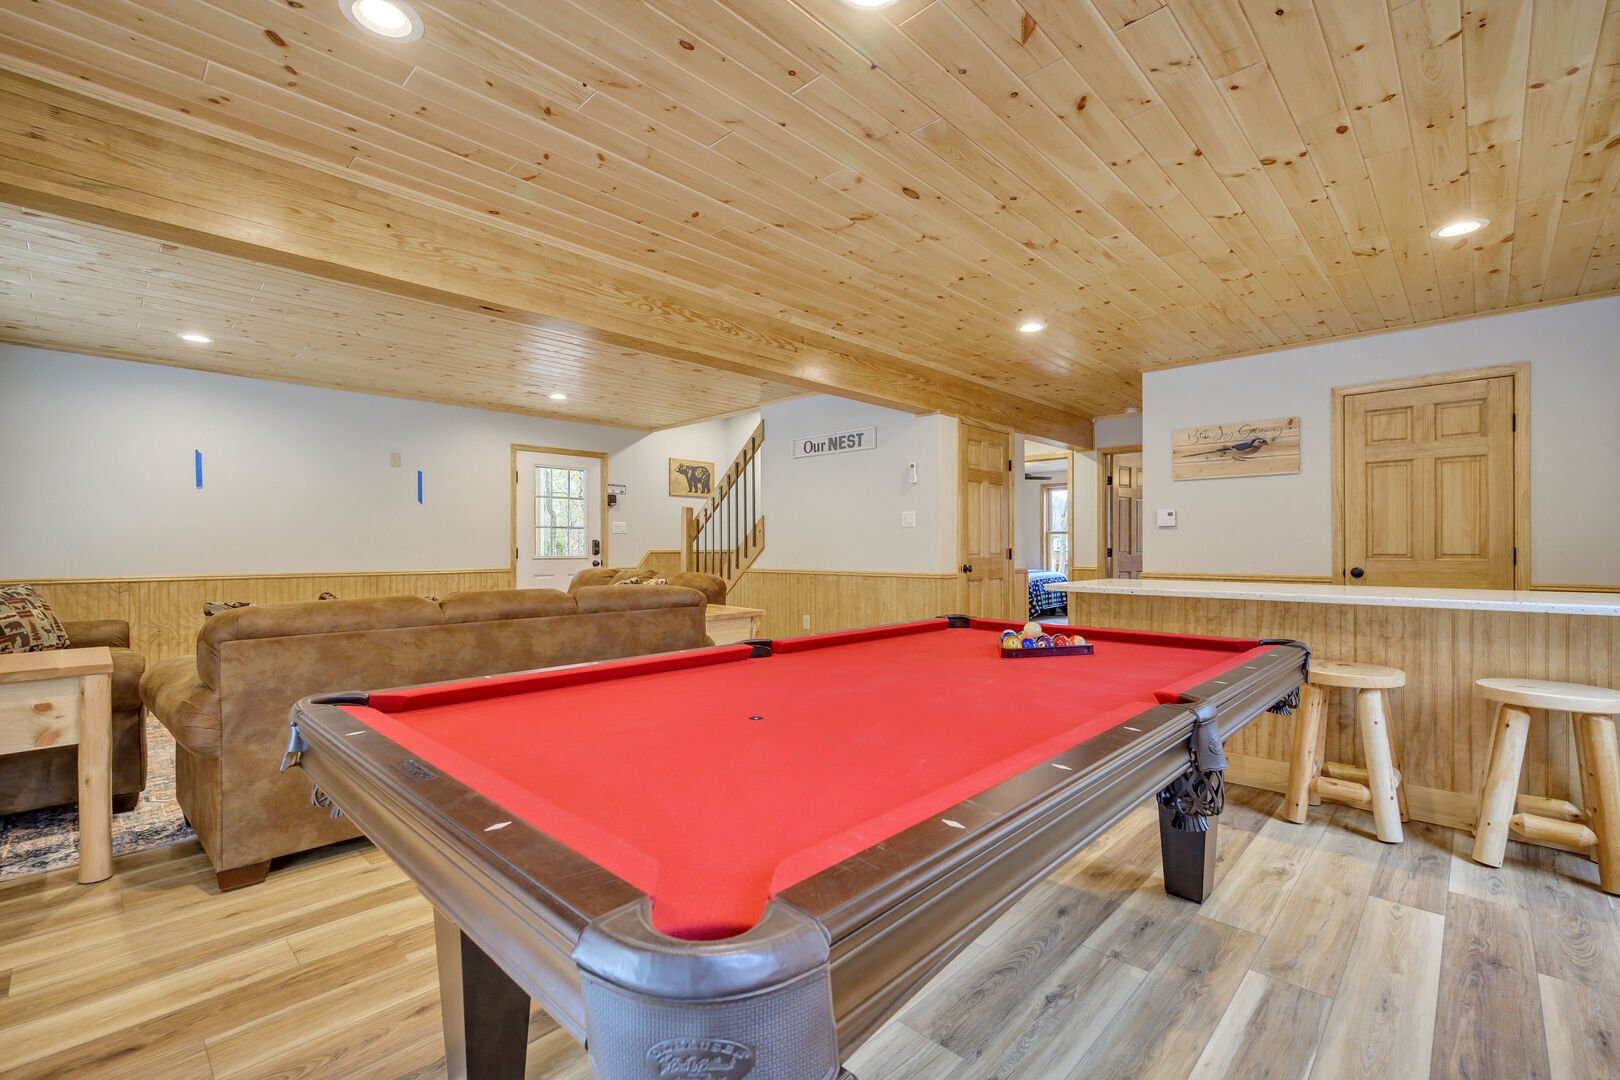 1st Floor Game Room features a Pool Table, Bar and Comfy TV Lounging area.